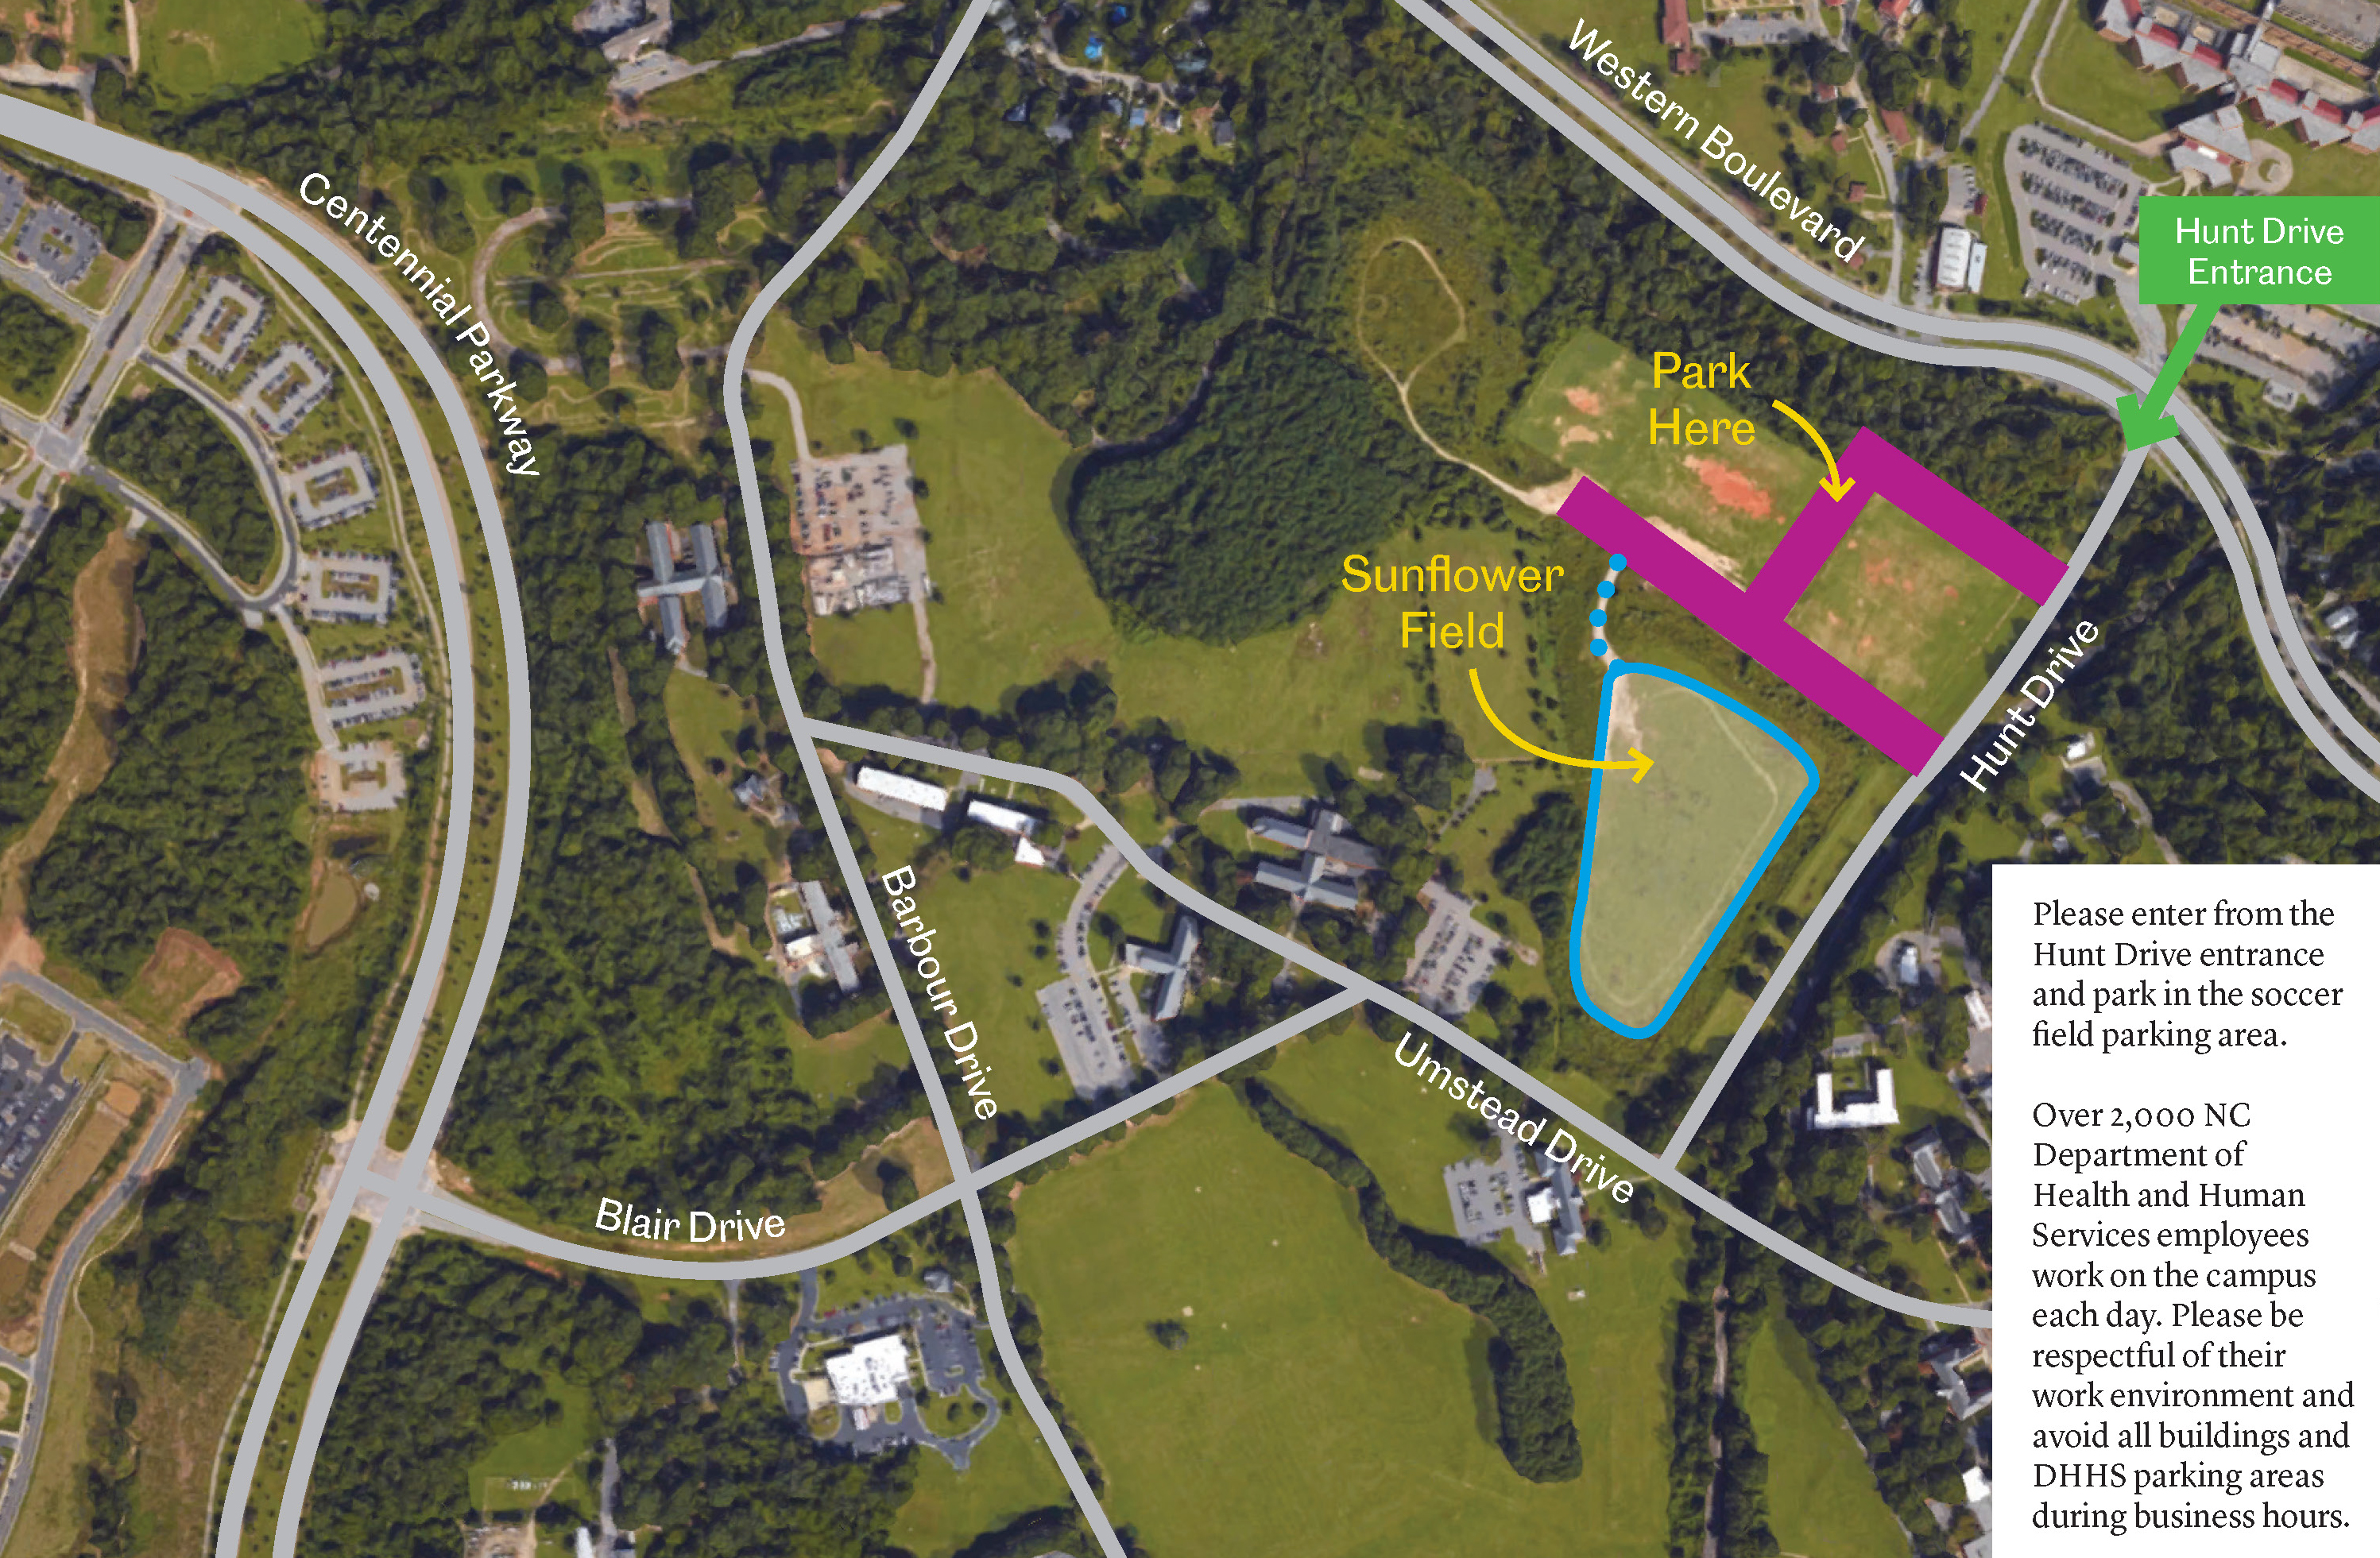 parking directions for Sunflower Field at Dix Park